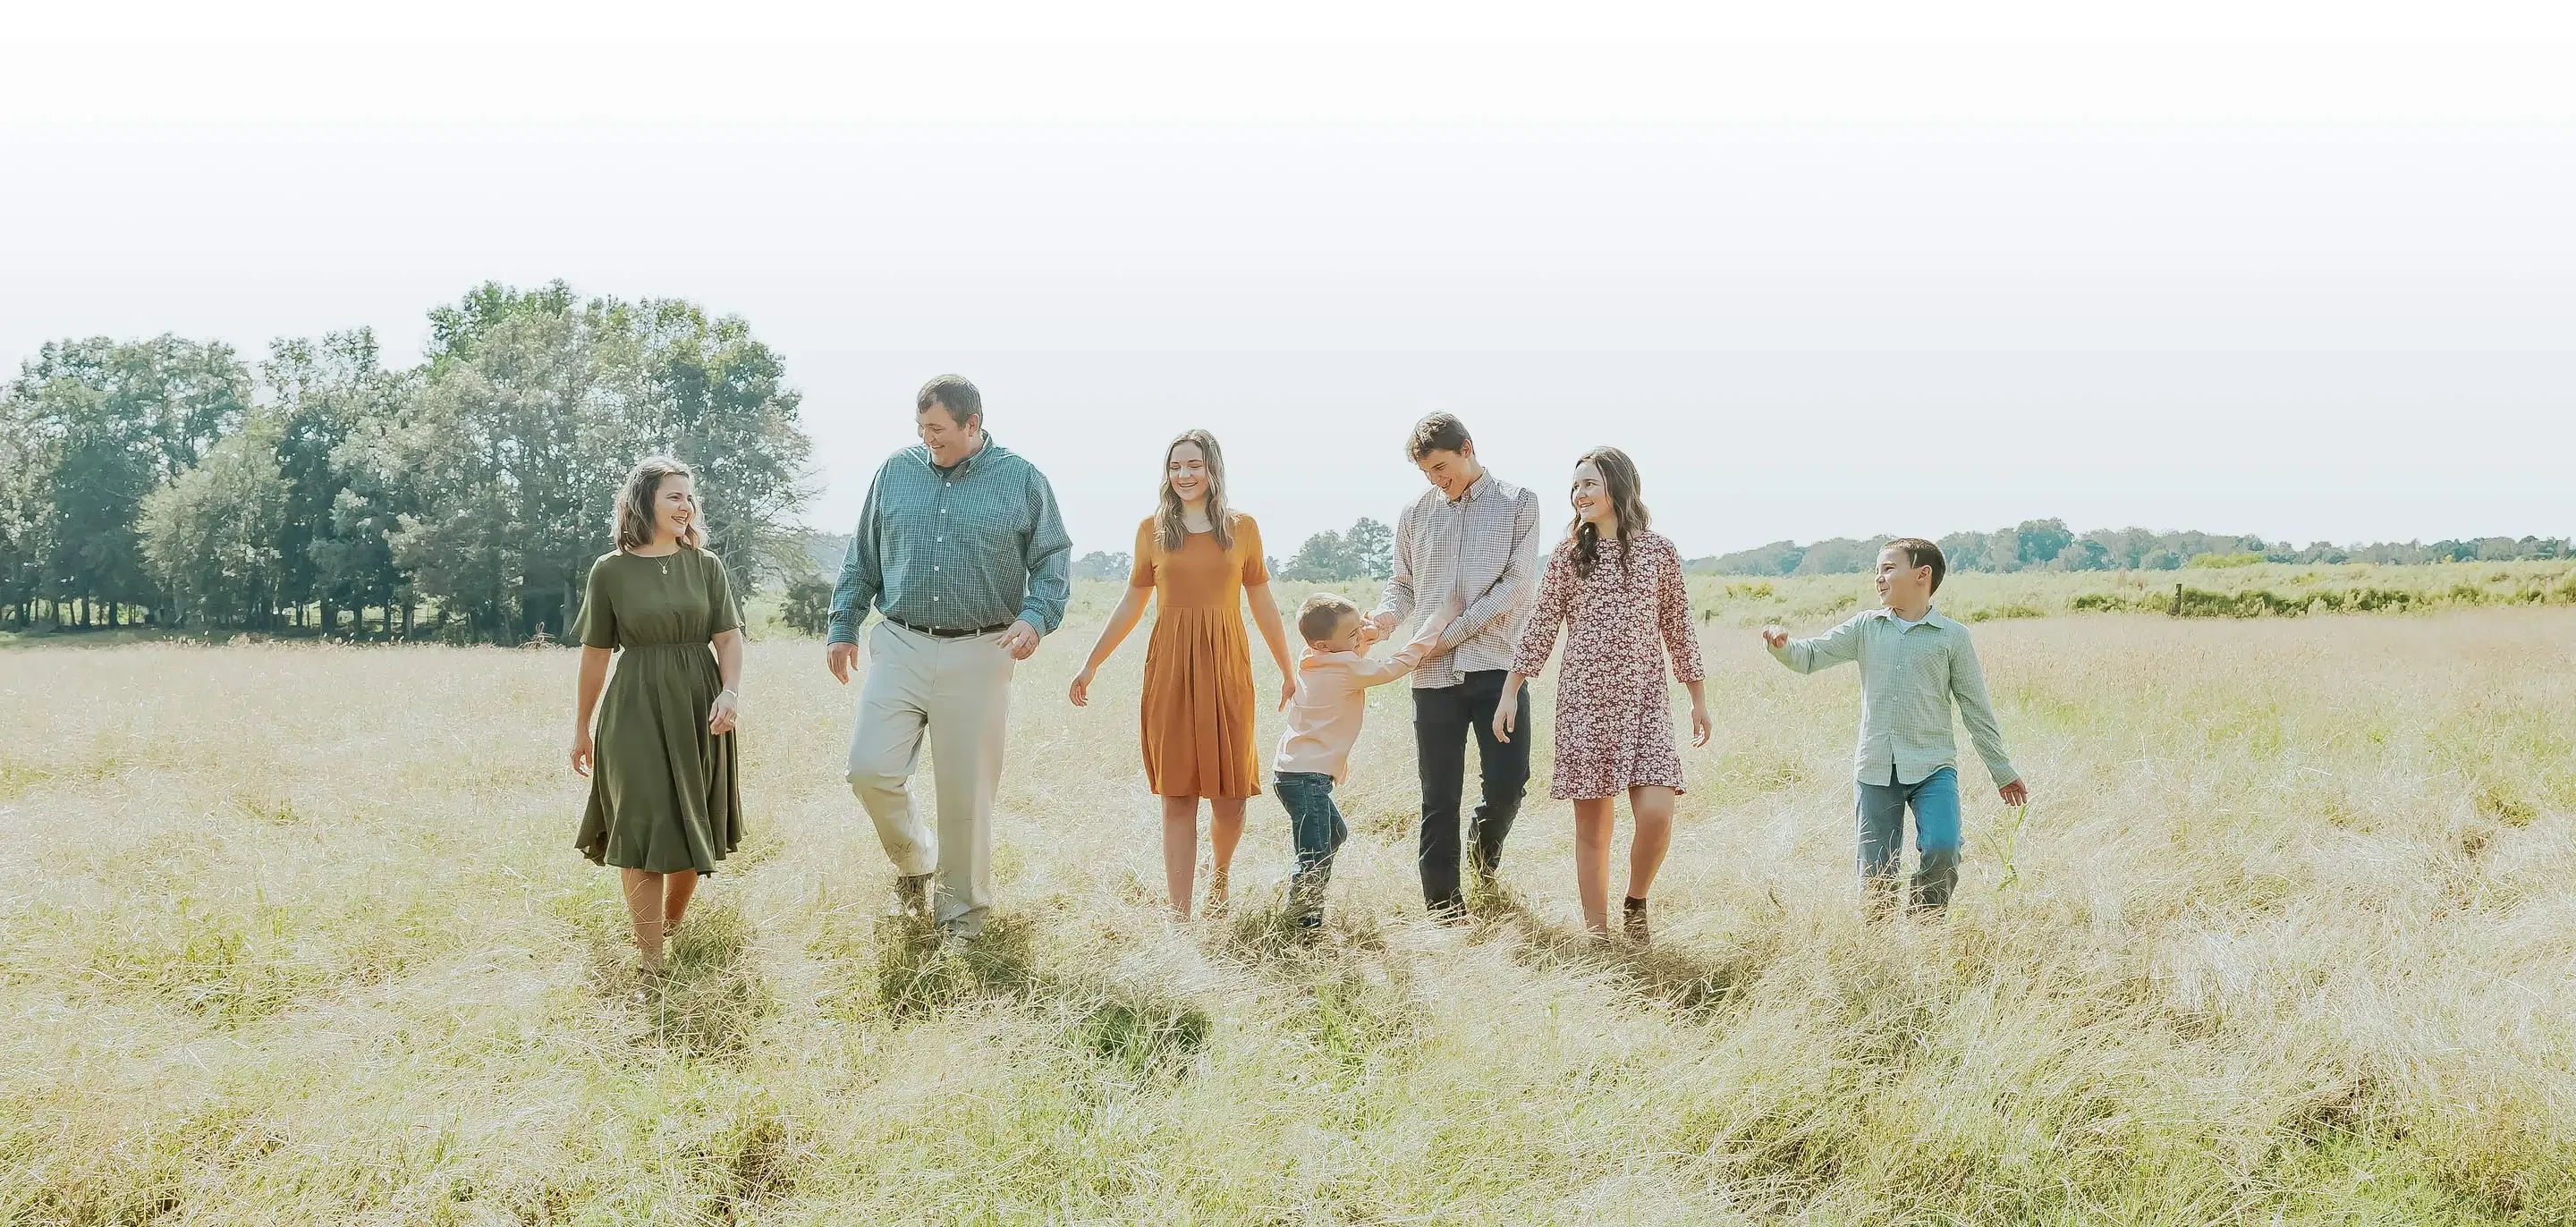 A lighthearted family strolls through a grassy field on a bright and sunny day